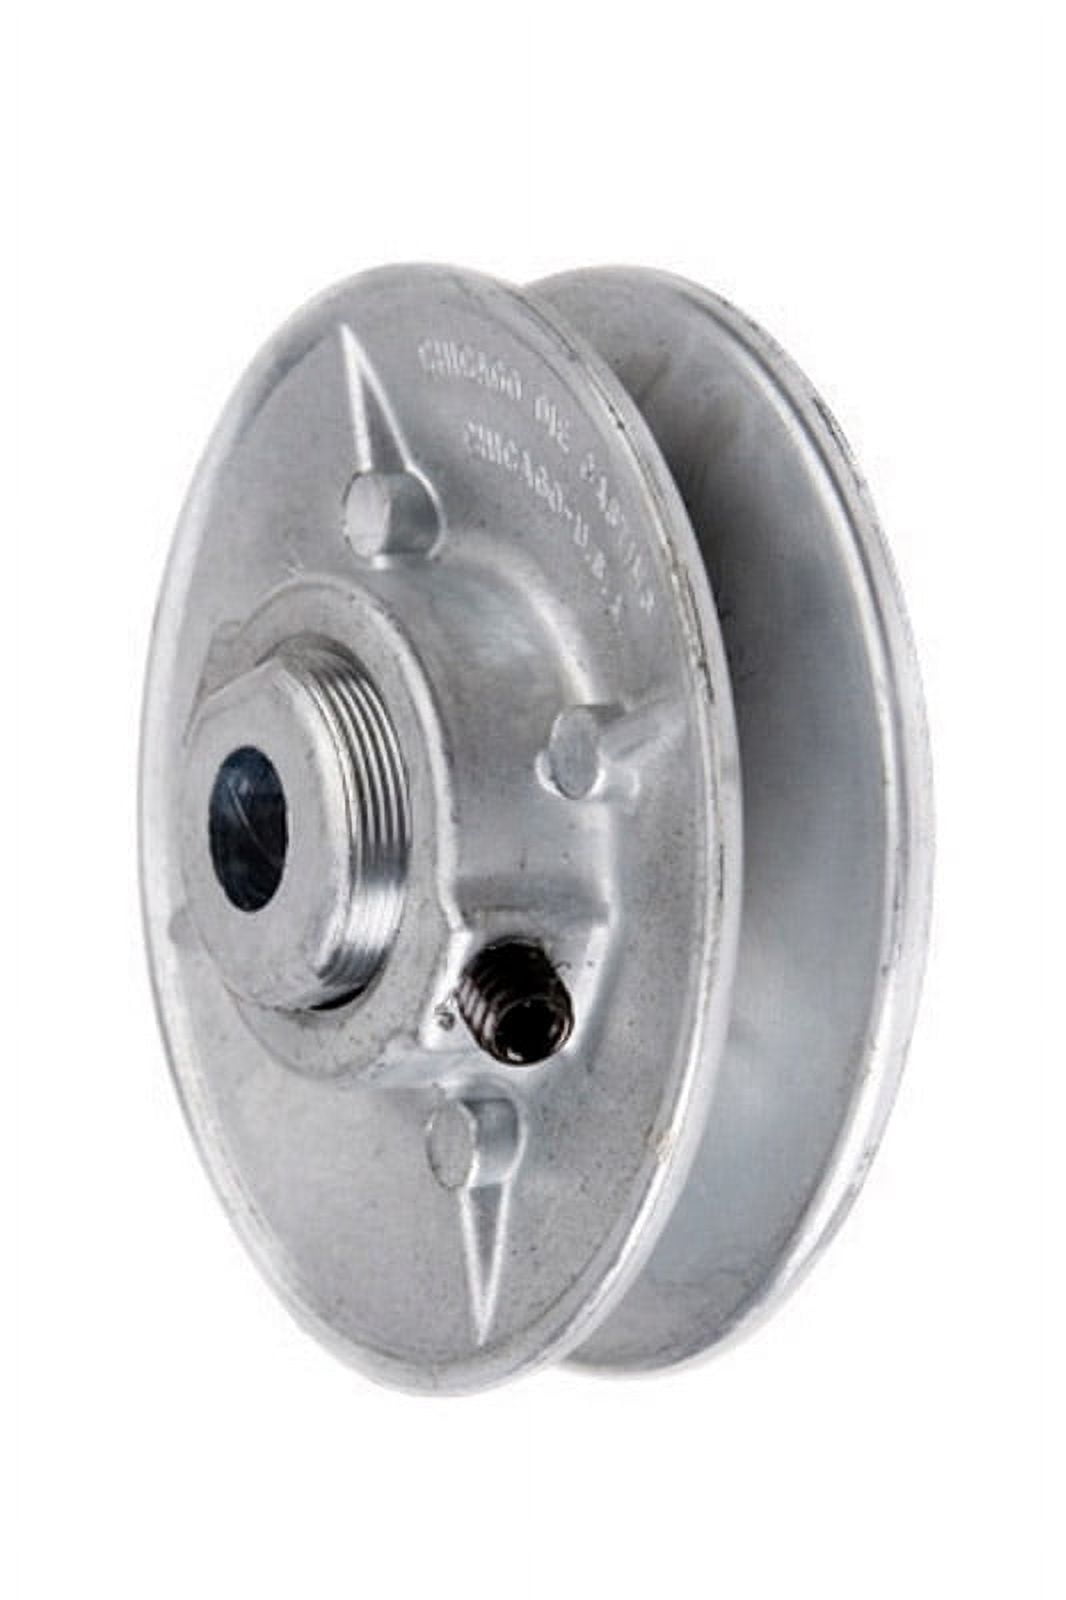 3.75 X 0.5 In. Bore Pulley